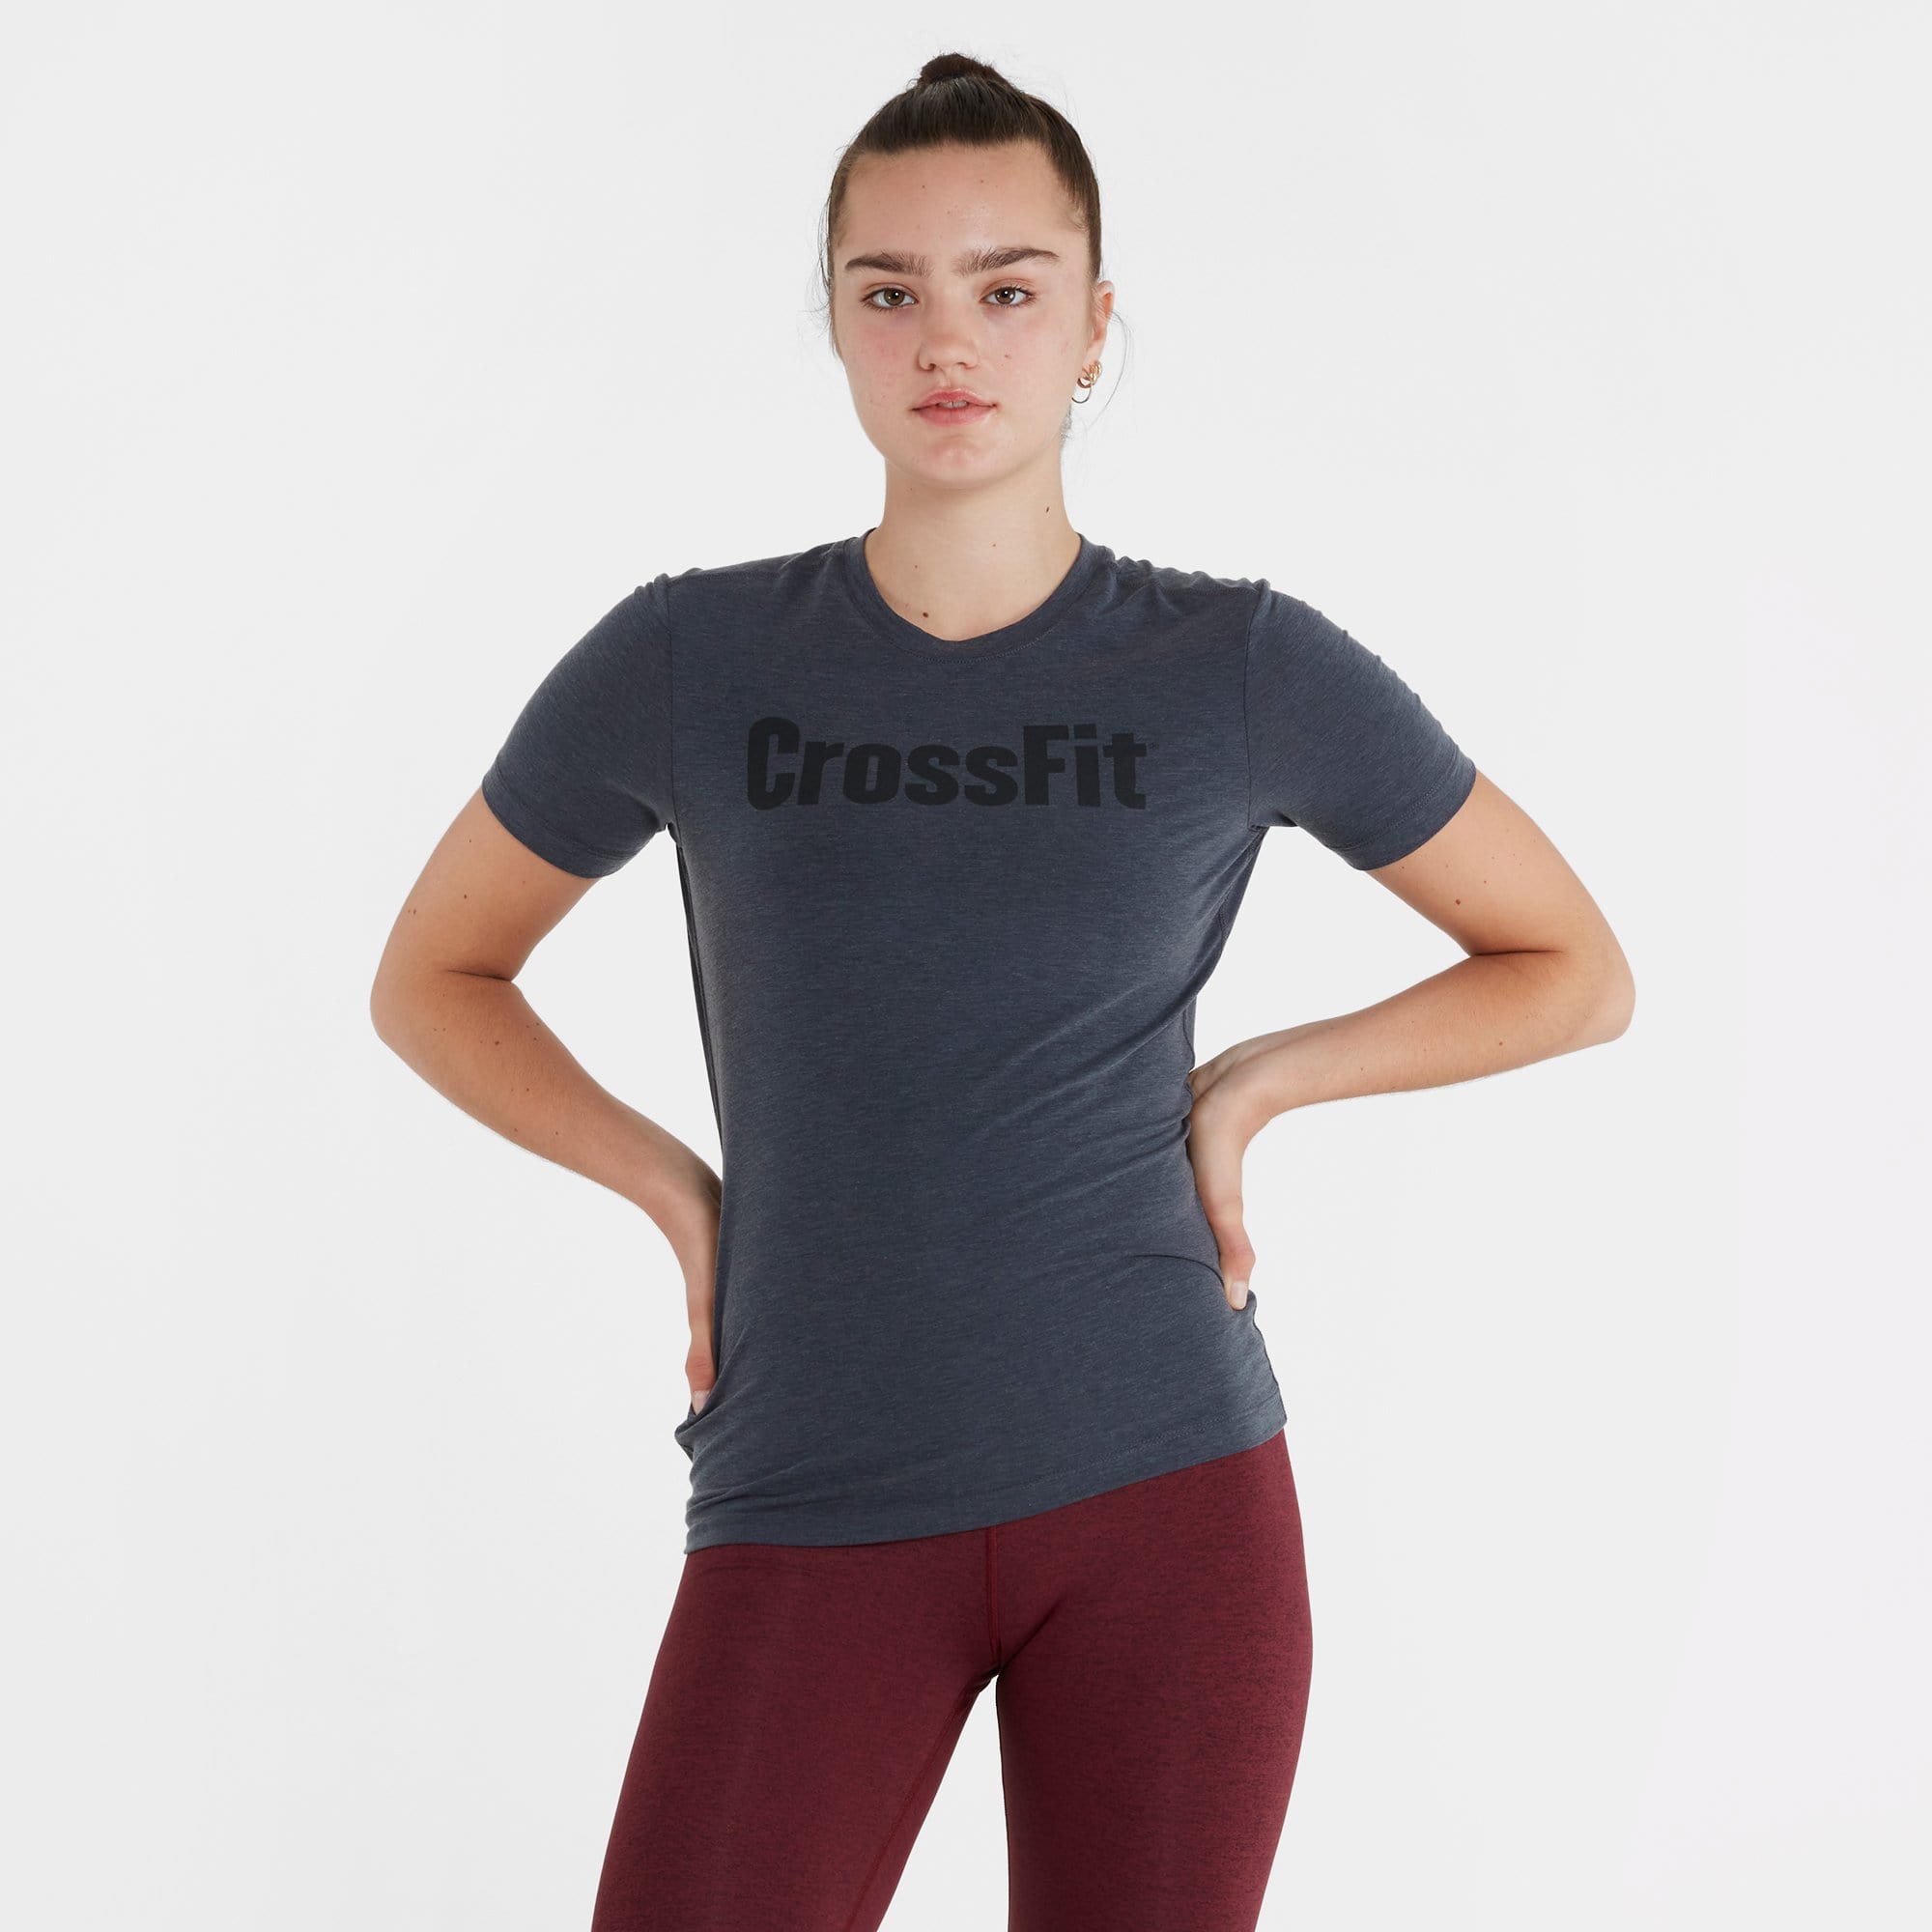 NOBULL Women's CrossFit Tee In Charcoal WIT Fitness